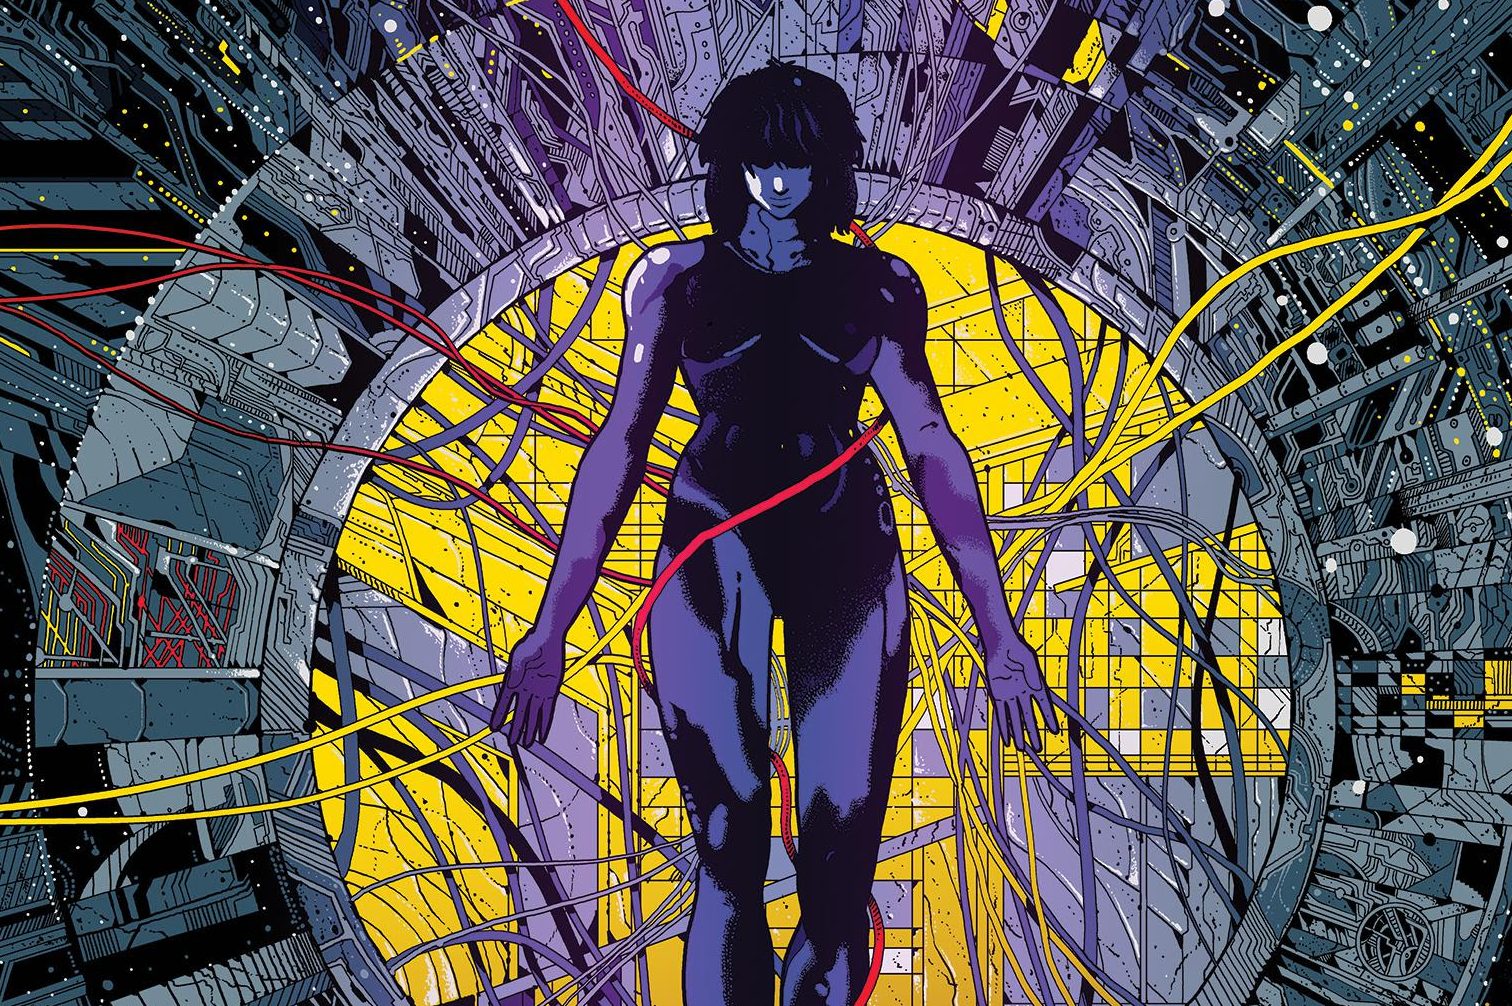 Ghost in the Shell Anime Returns to Theaters | The Mary Sue